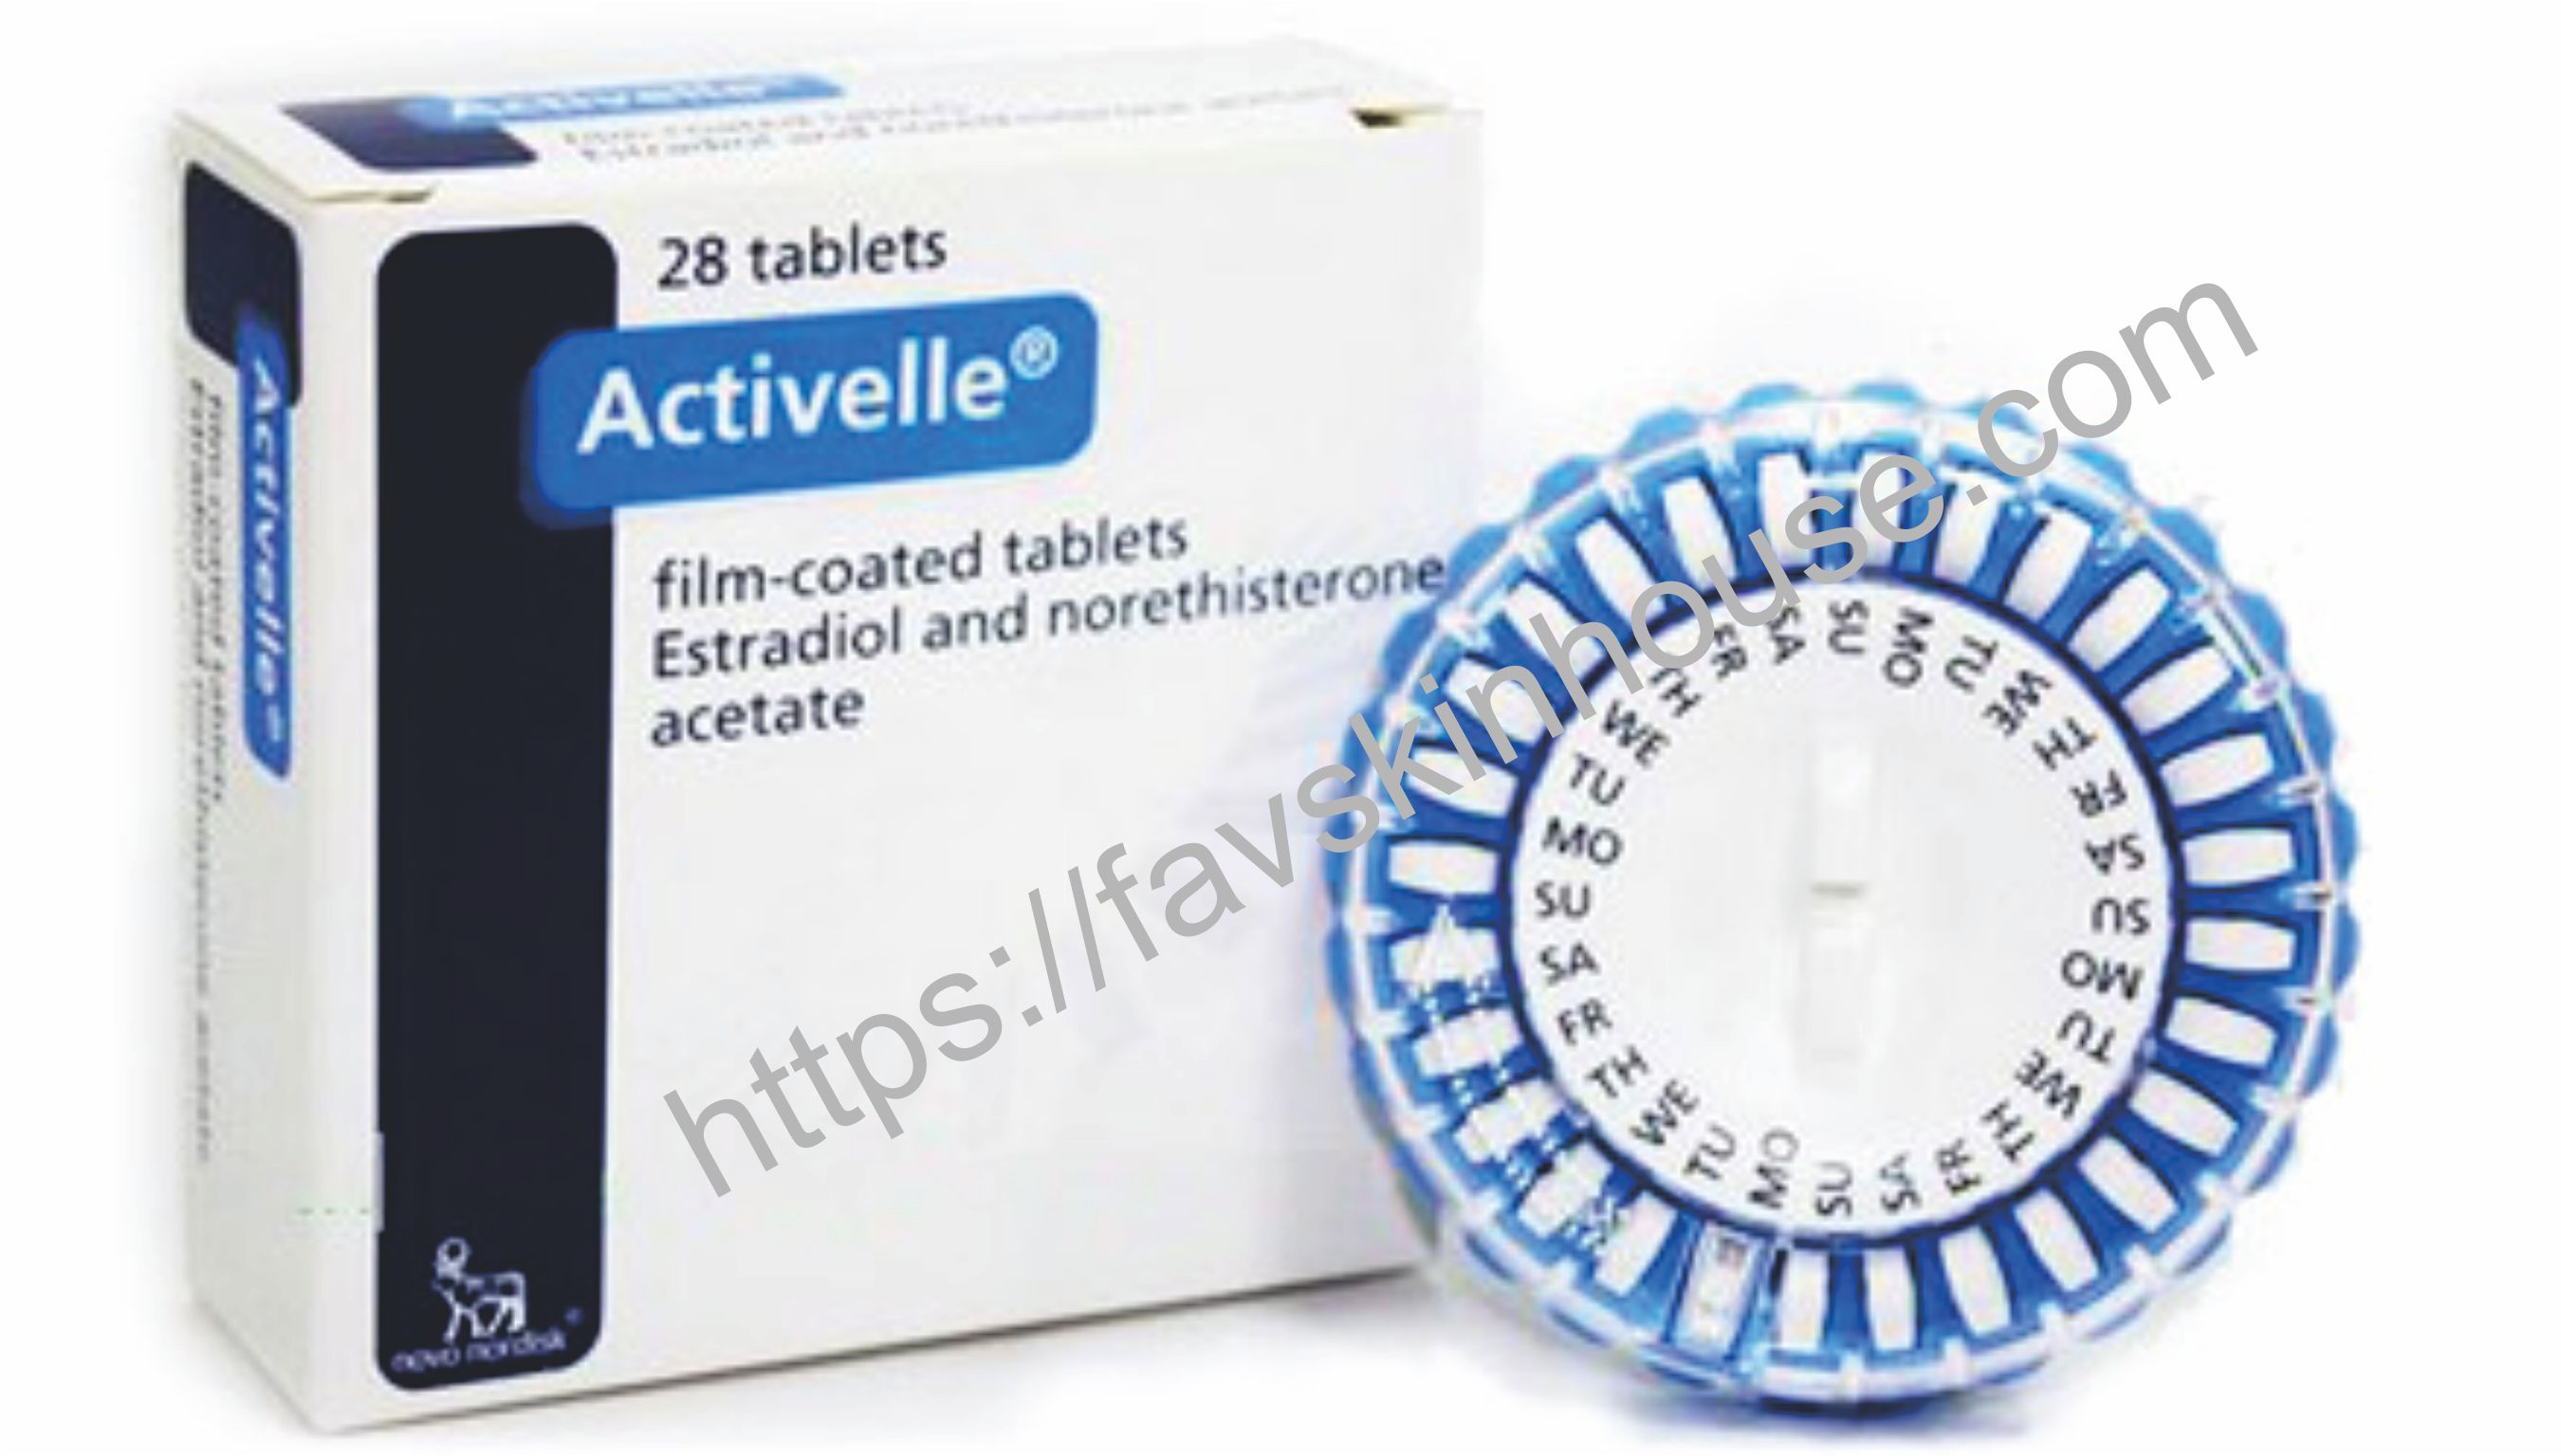 Activelle 28 tablets